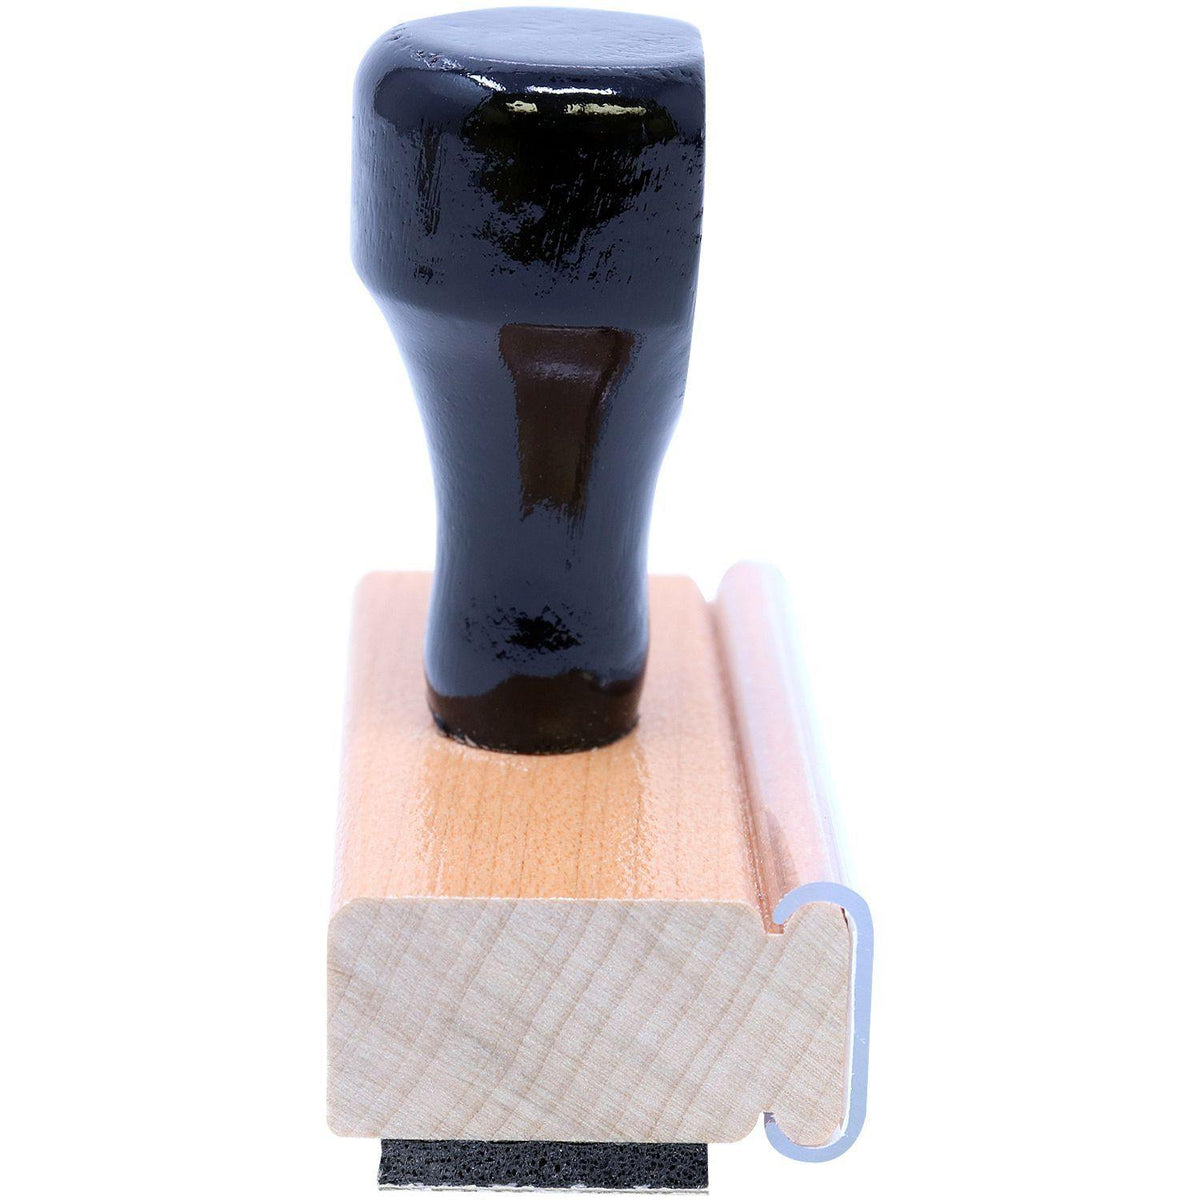 Lawyer Motion Rubber Stamp - Engineer Seal Stamps - Brand_Acorn, Impression Size_Small, Stamp Type_Regular Stamp, Type of Use_Legal